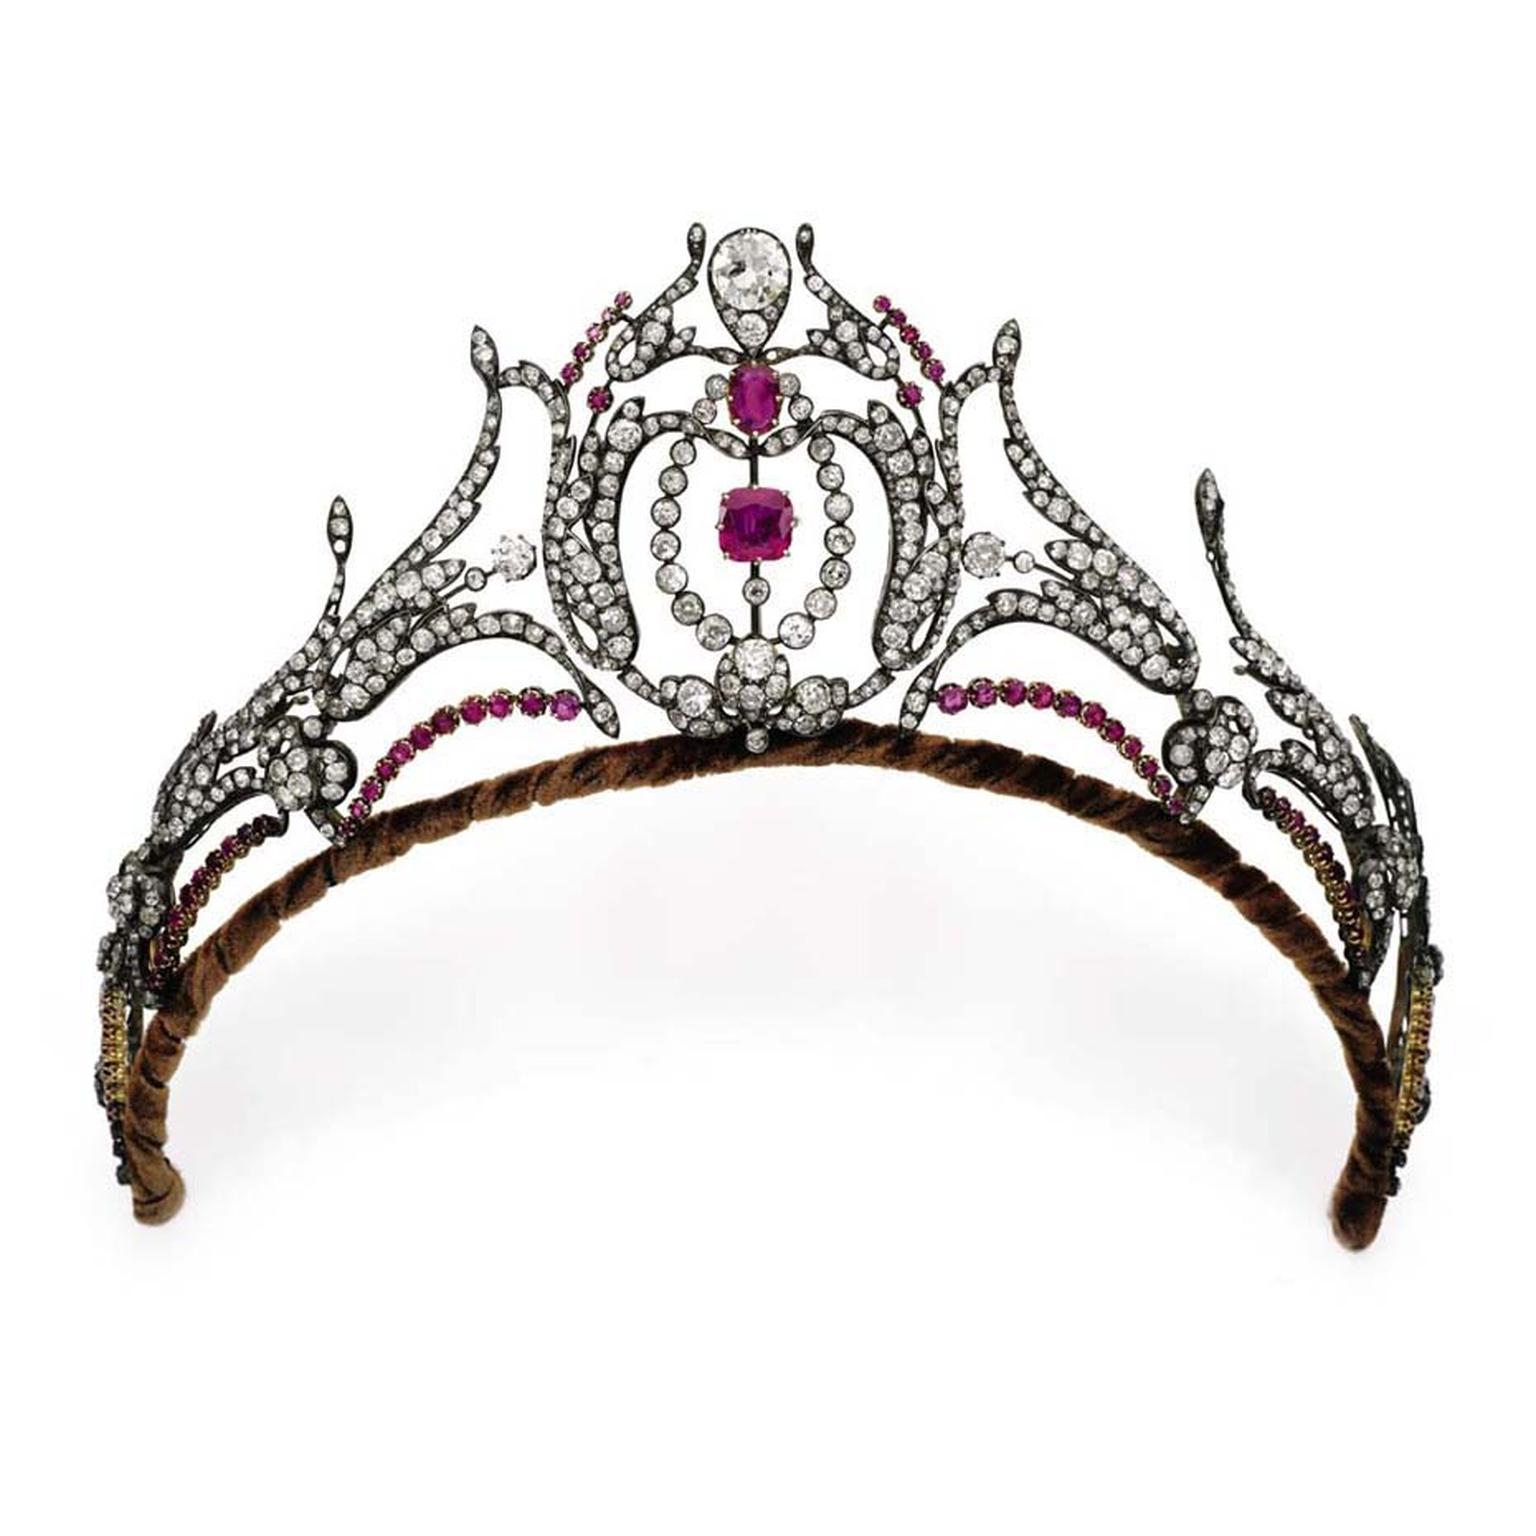 This diamond and ruby tiara, thought to be from the second half of the 19th century, sold for $109,000.